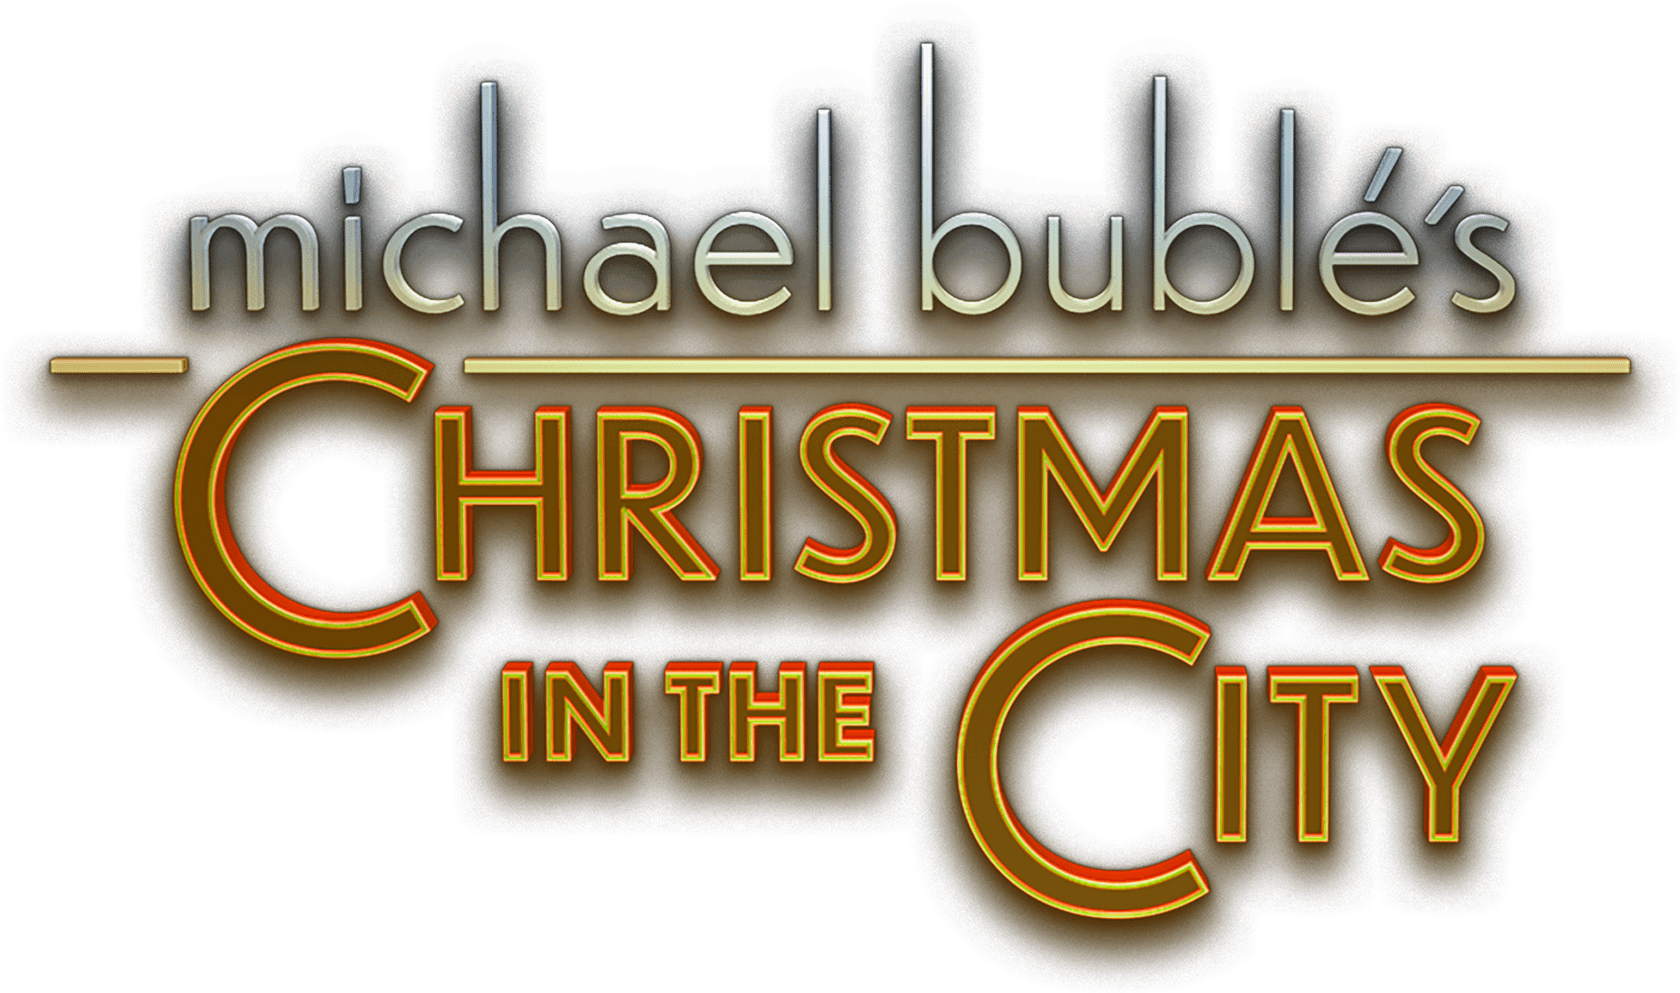 Michael Bublé's Christmas in the City logo